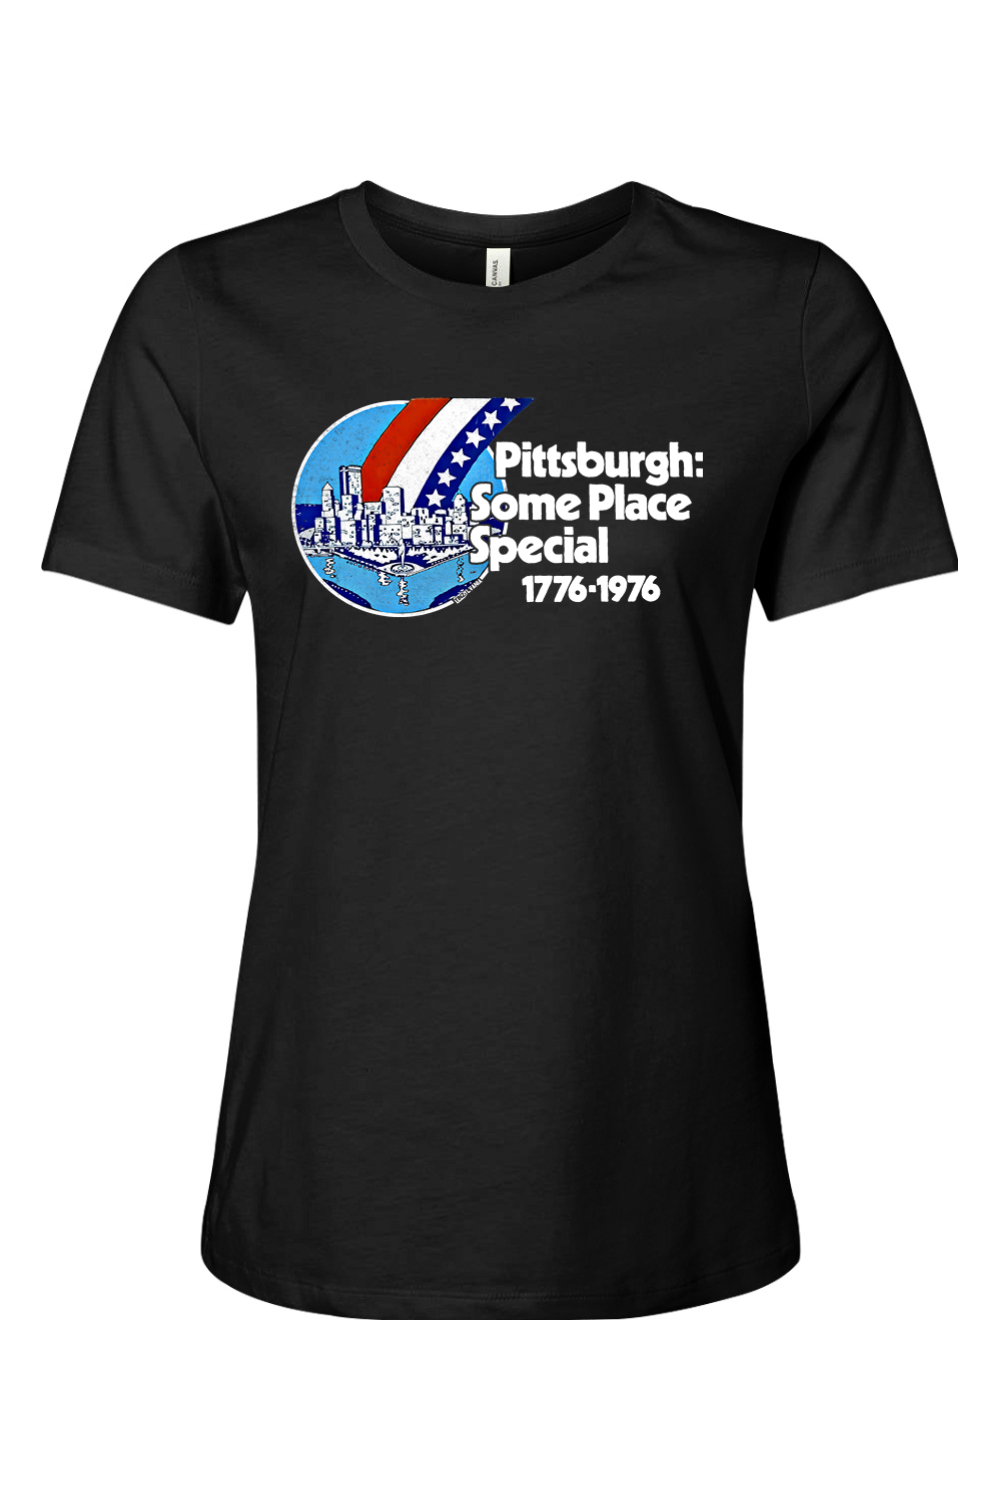 Pittsburgh - Some Place Special - Ladies Tee - Yinzylvania